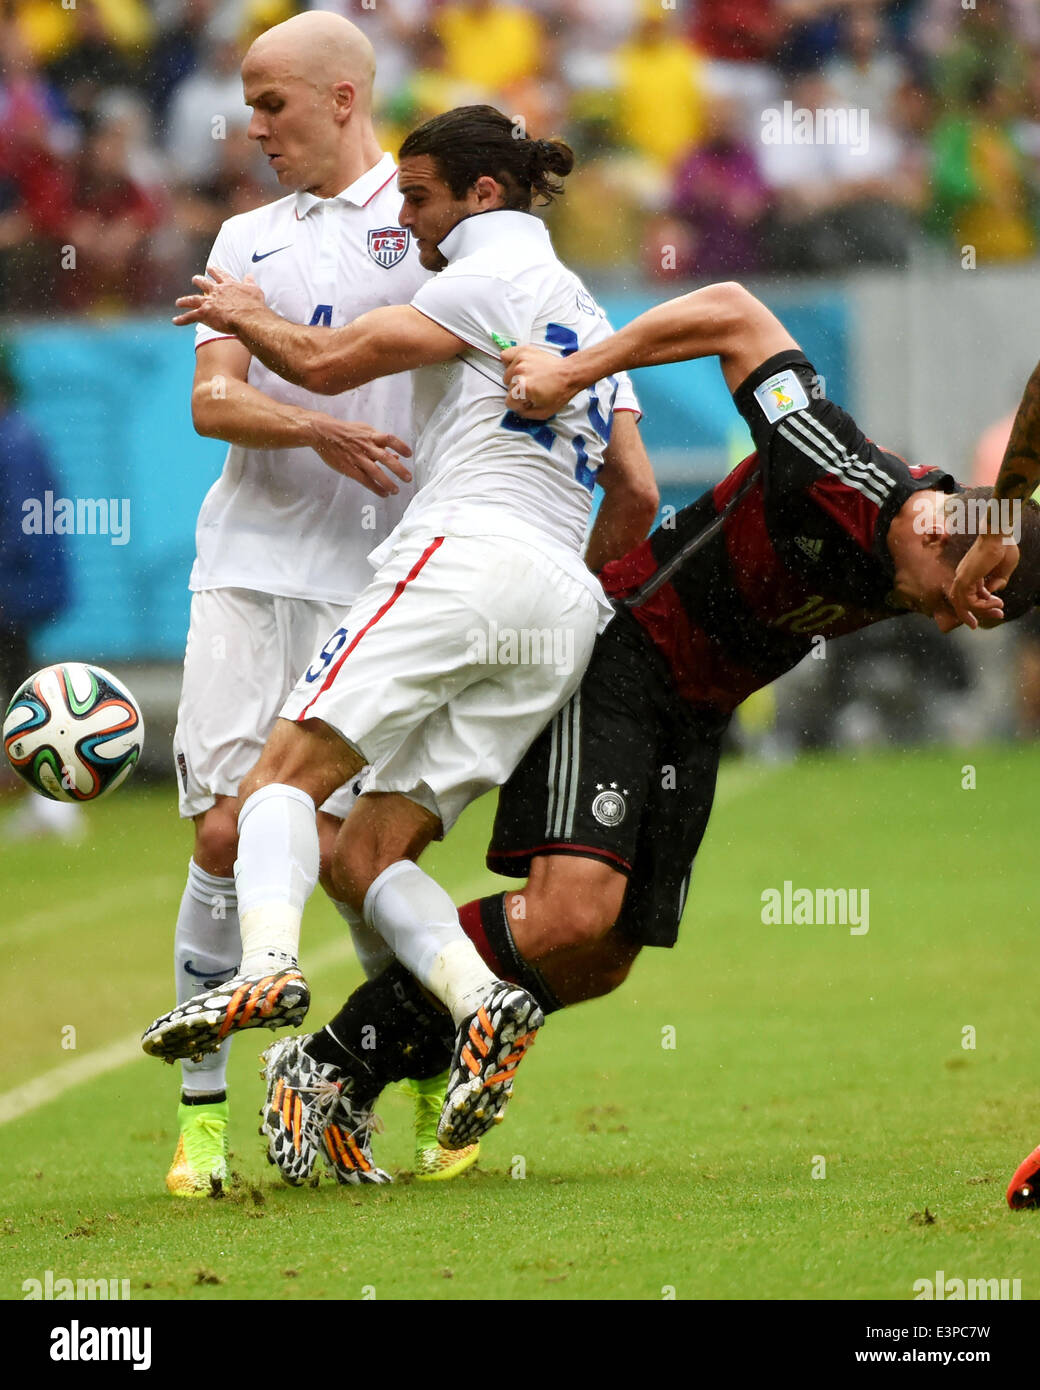 Recife, Brazil. 26th June, 2014. Germany's Lukas Podolski (R) vies with Graham Zusi (C) and Michael Bradley (L) of the U.S. during a Group G match between the U.S. and Germany of 2014 FIFA World Cup at the Arena Pernambuco Stadium in Recife, Brazil, on June 26, 2014. Credit:  Guo Yong/Xinhua/Alamy Live News Stock Photo